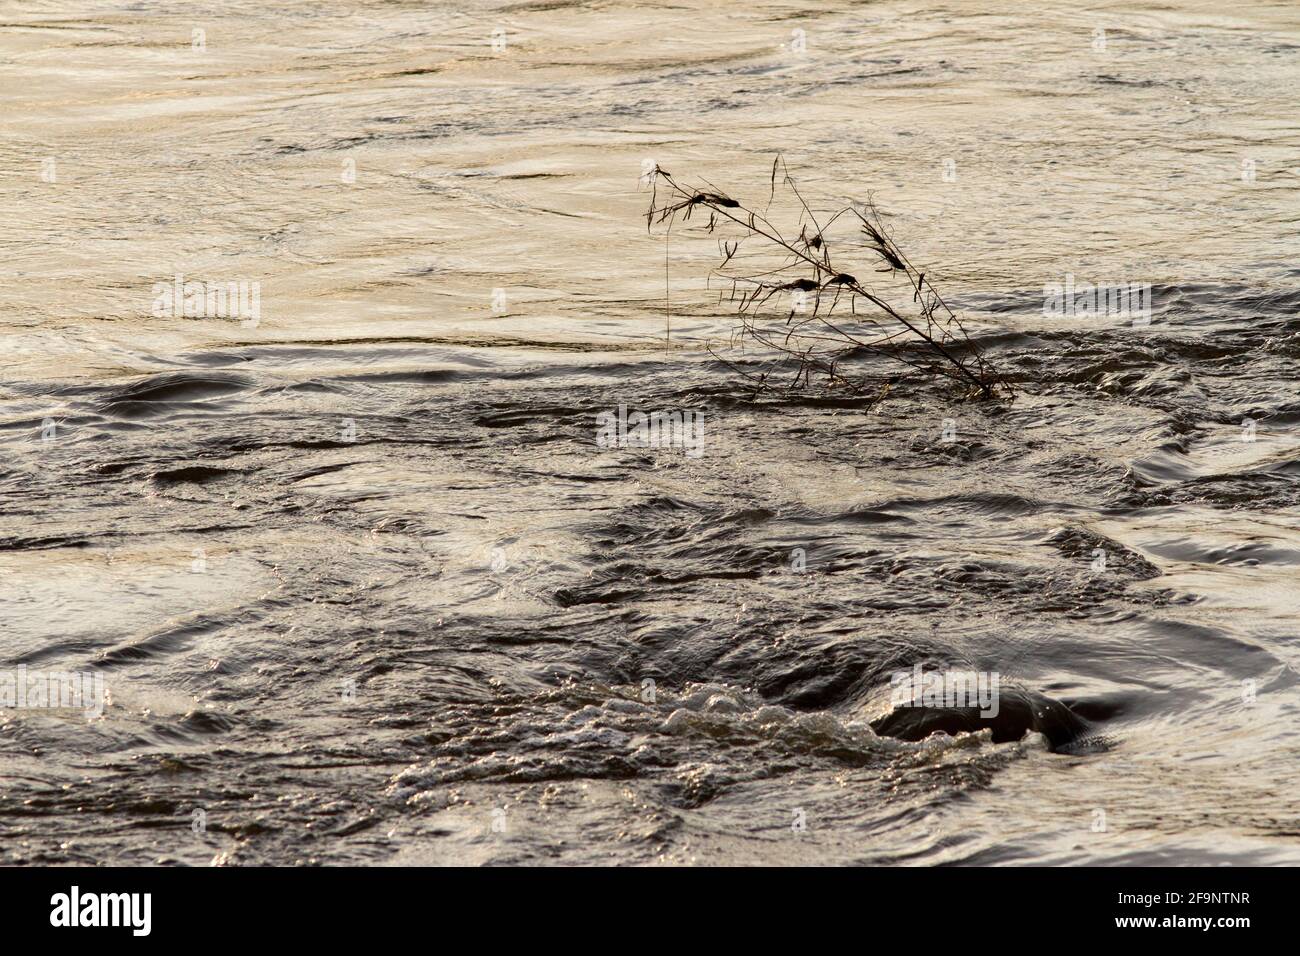 A solitary Phragmites reed bends in the flow of the rising flood waters of the Great Ruaha River during the rainy season. Stock Photo